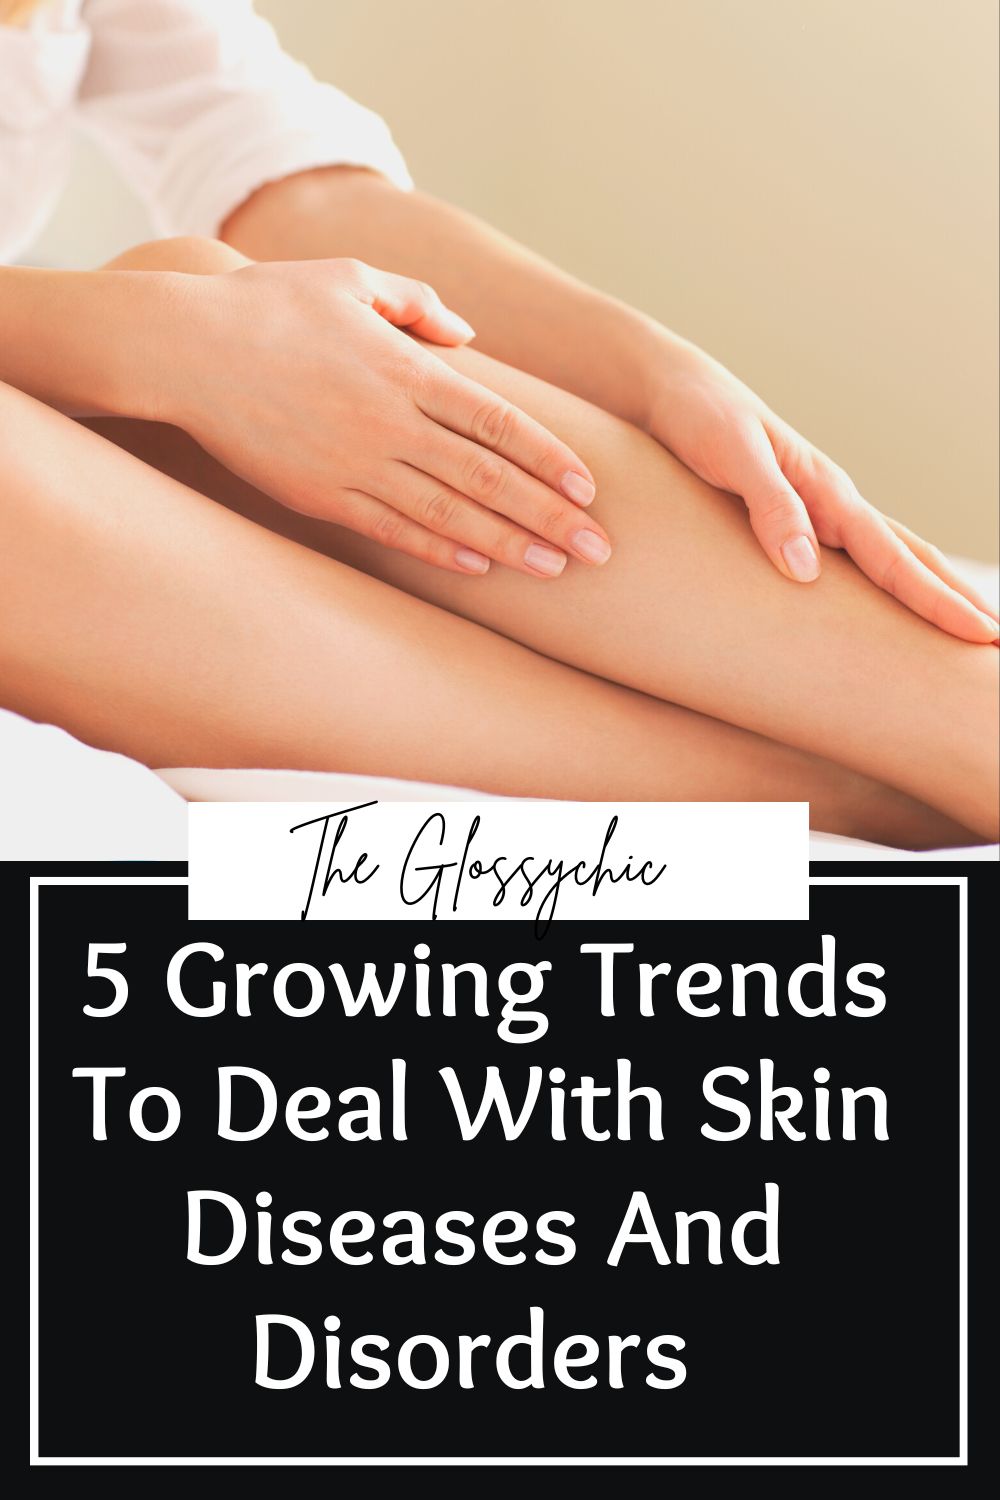 5 Growing Trends To Deal With Skin Diseases And Disorders